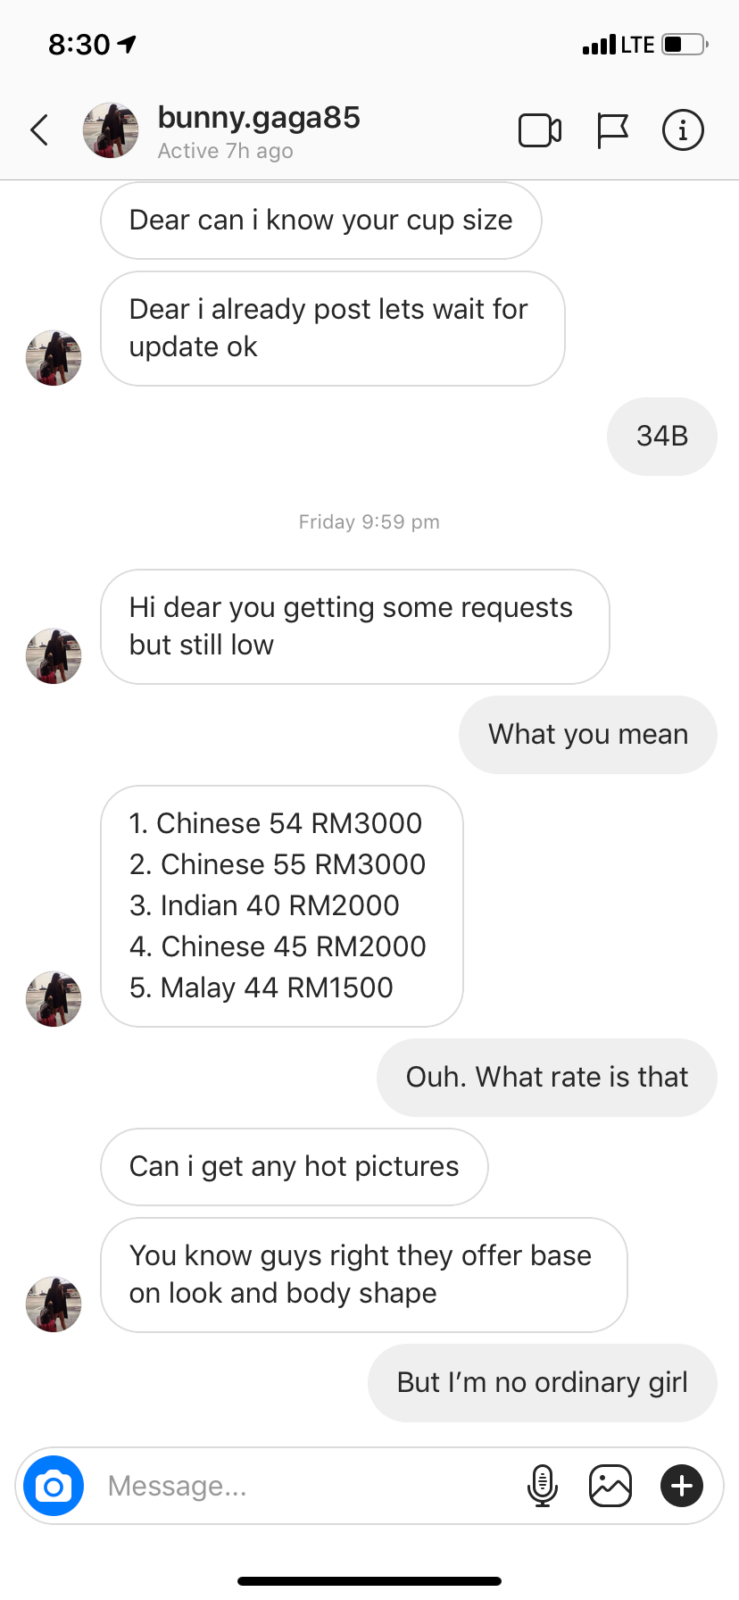 A Sugar Daddy Agent Messaged Me on Instagram and Said I Could Earn RM40,000 A Month - WORLD OF BUZZ 7